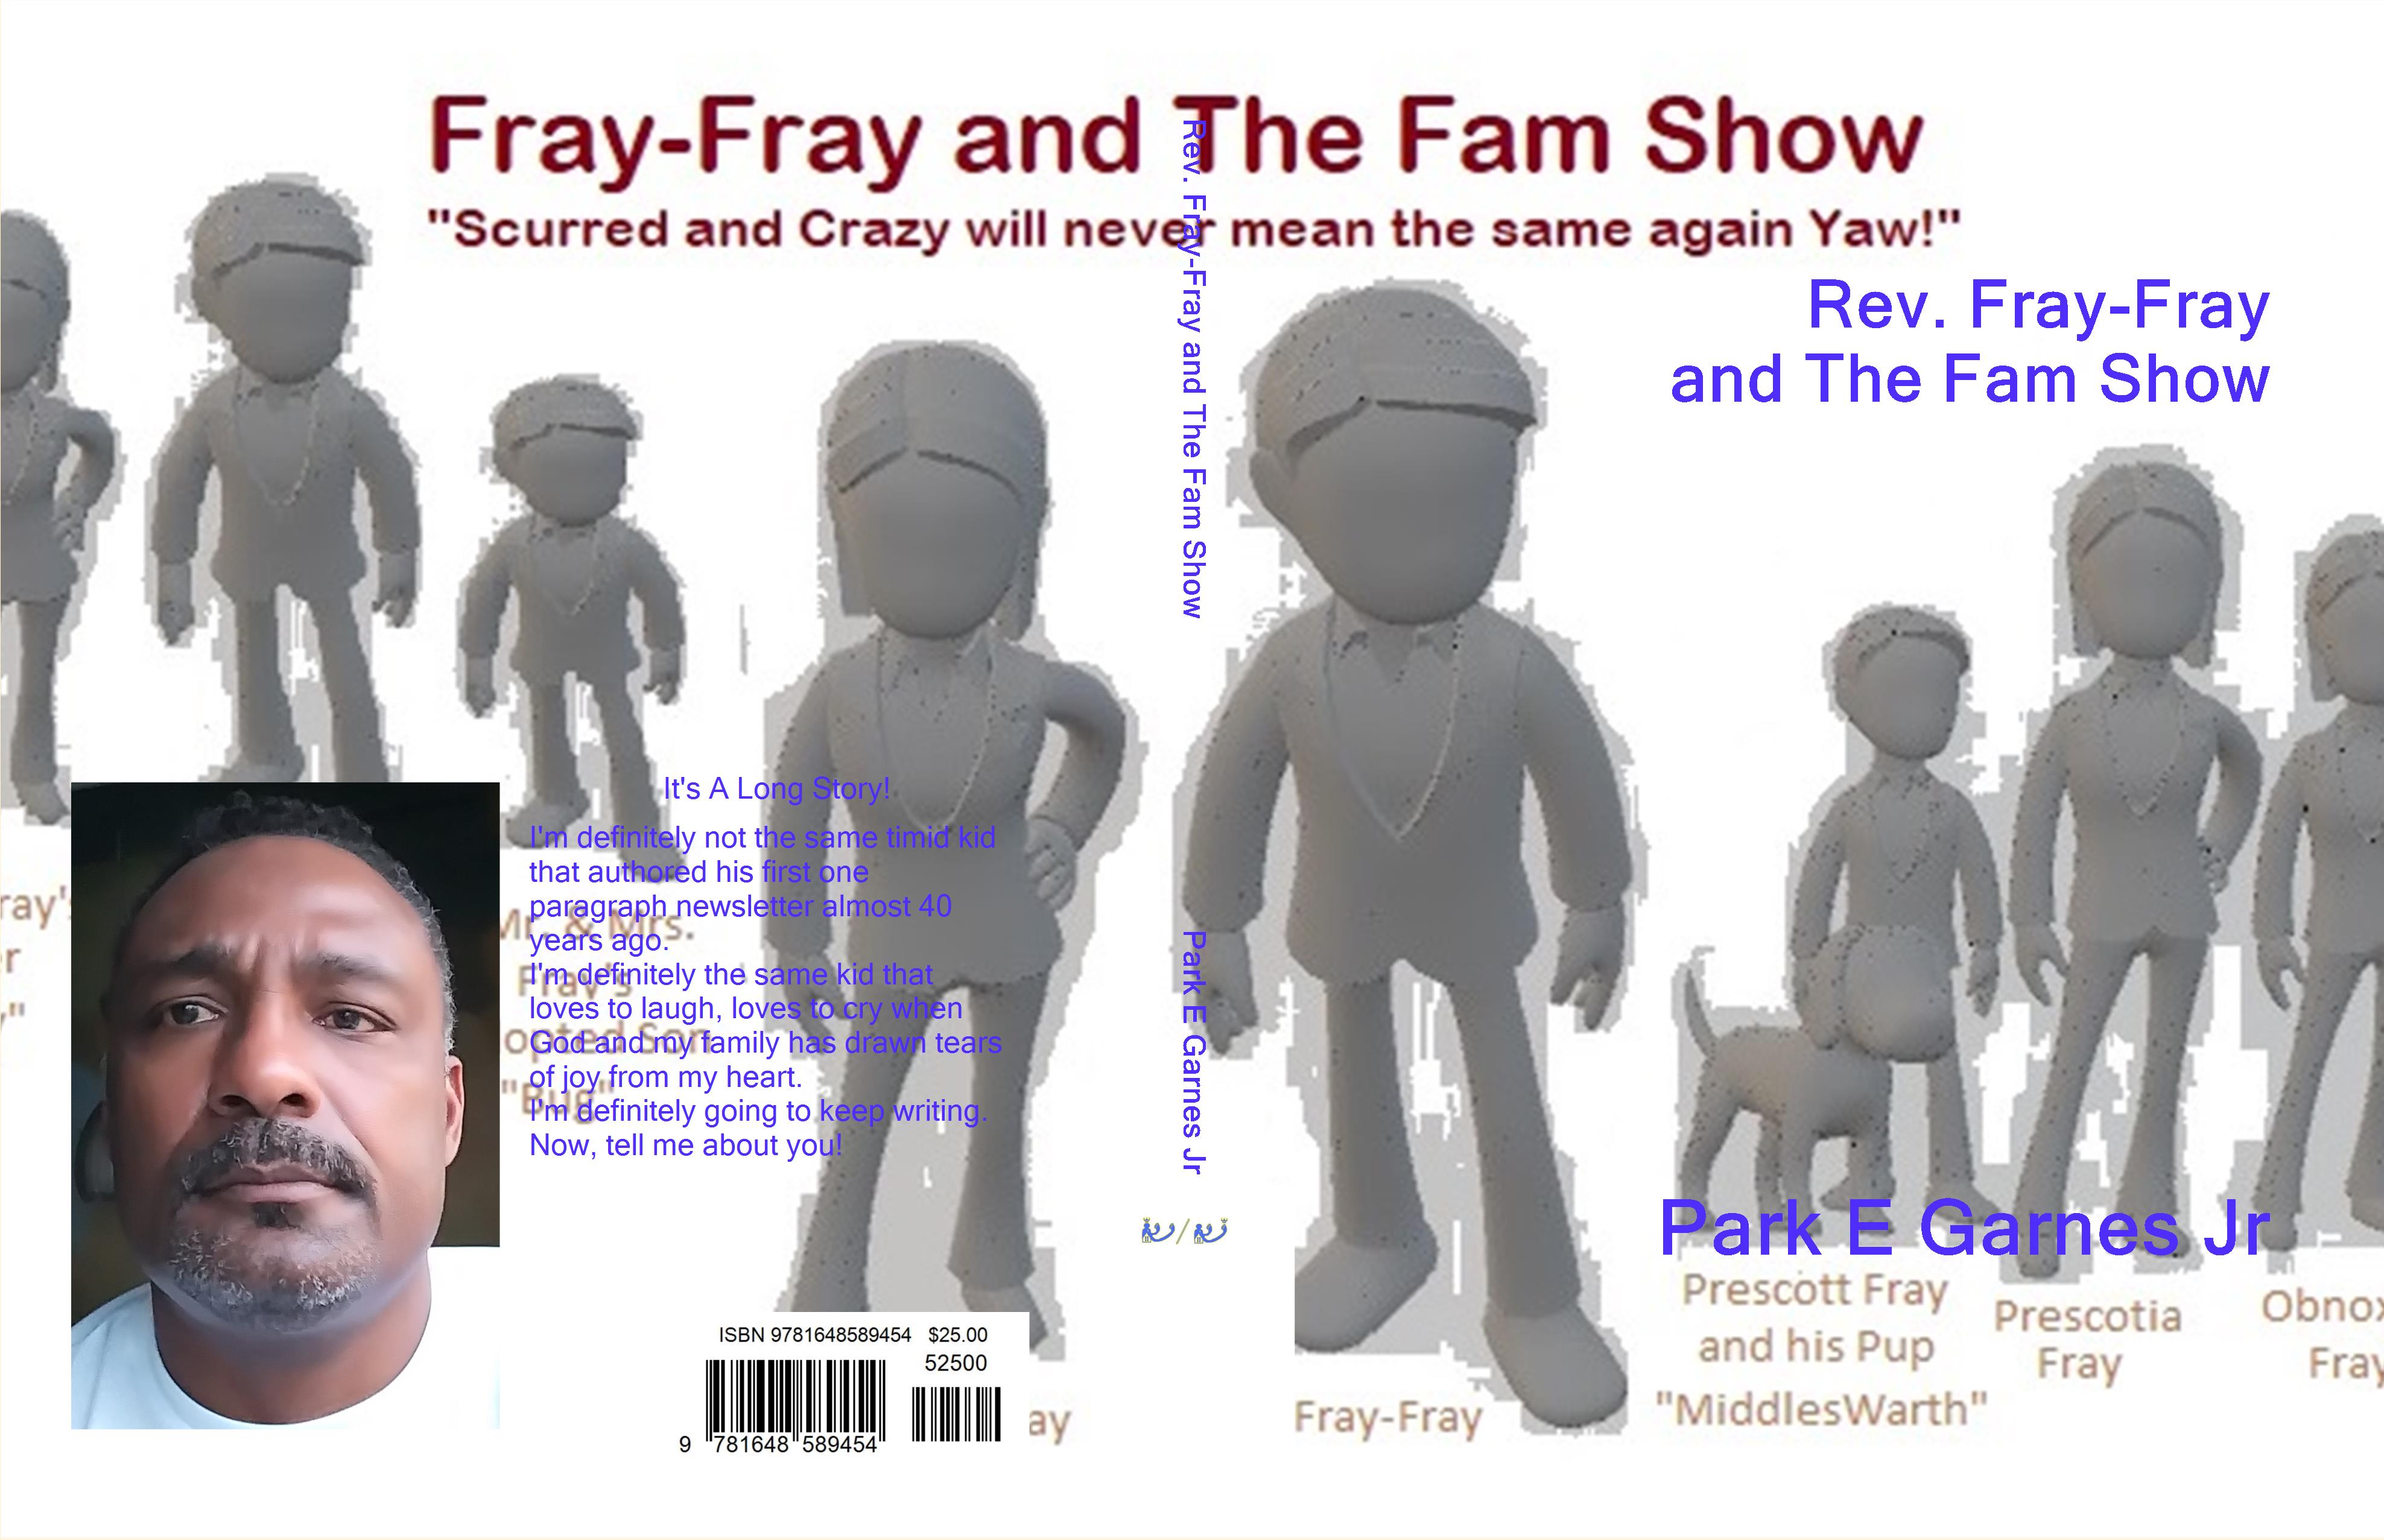 Rev. Fray-Fray and The Fam Show cover image